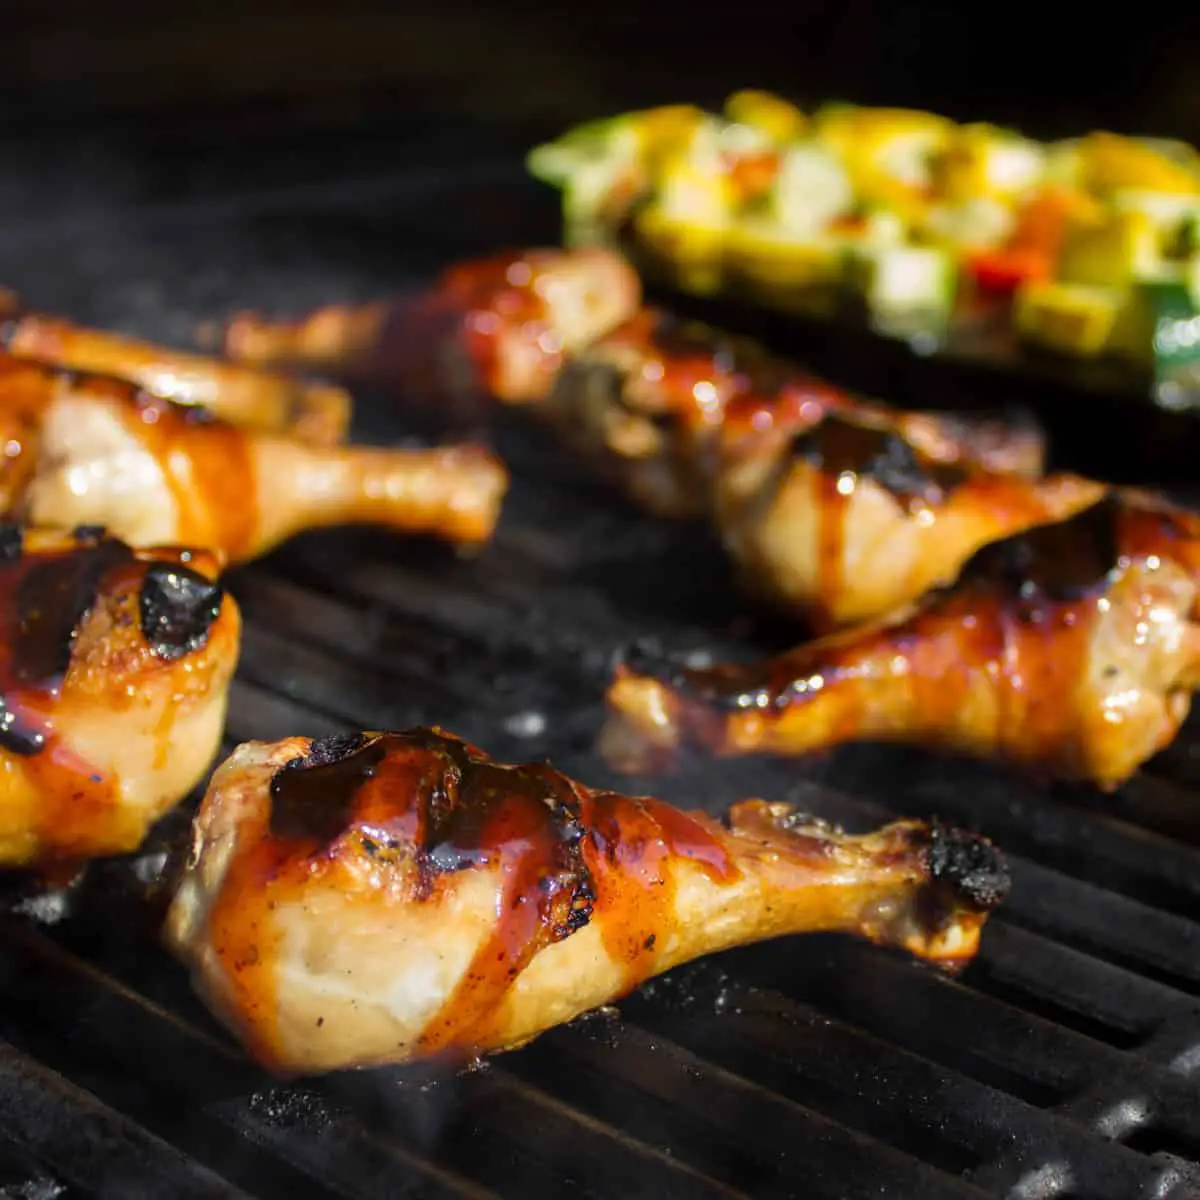 How to Grill Chicken Drumsticks